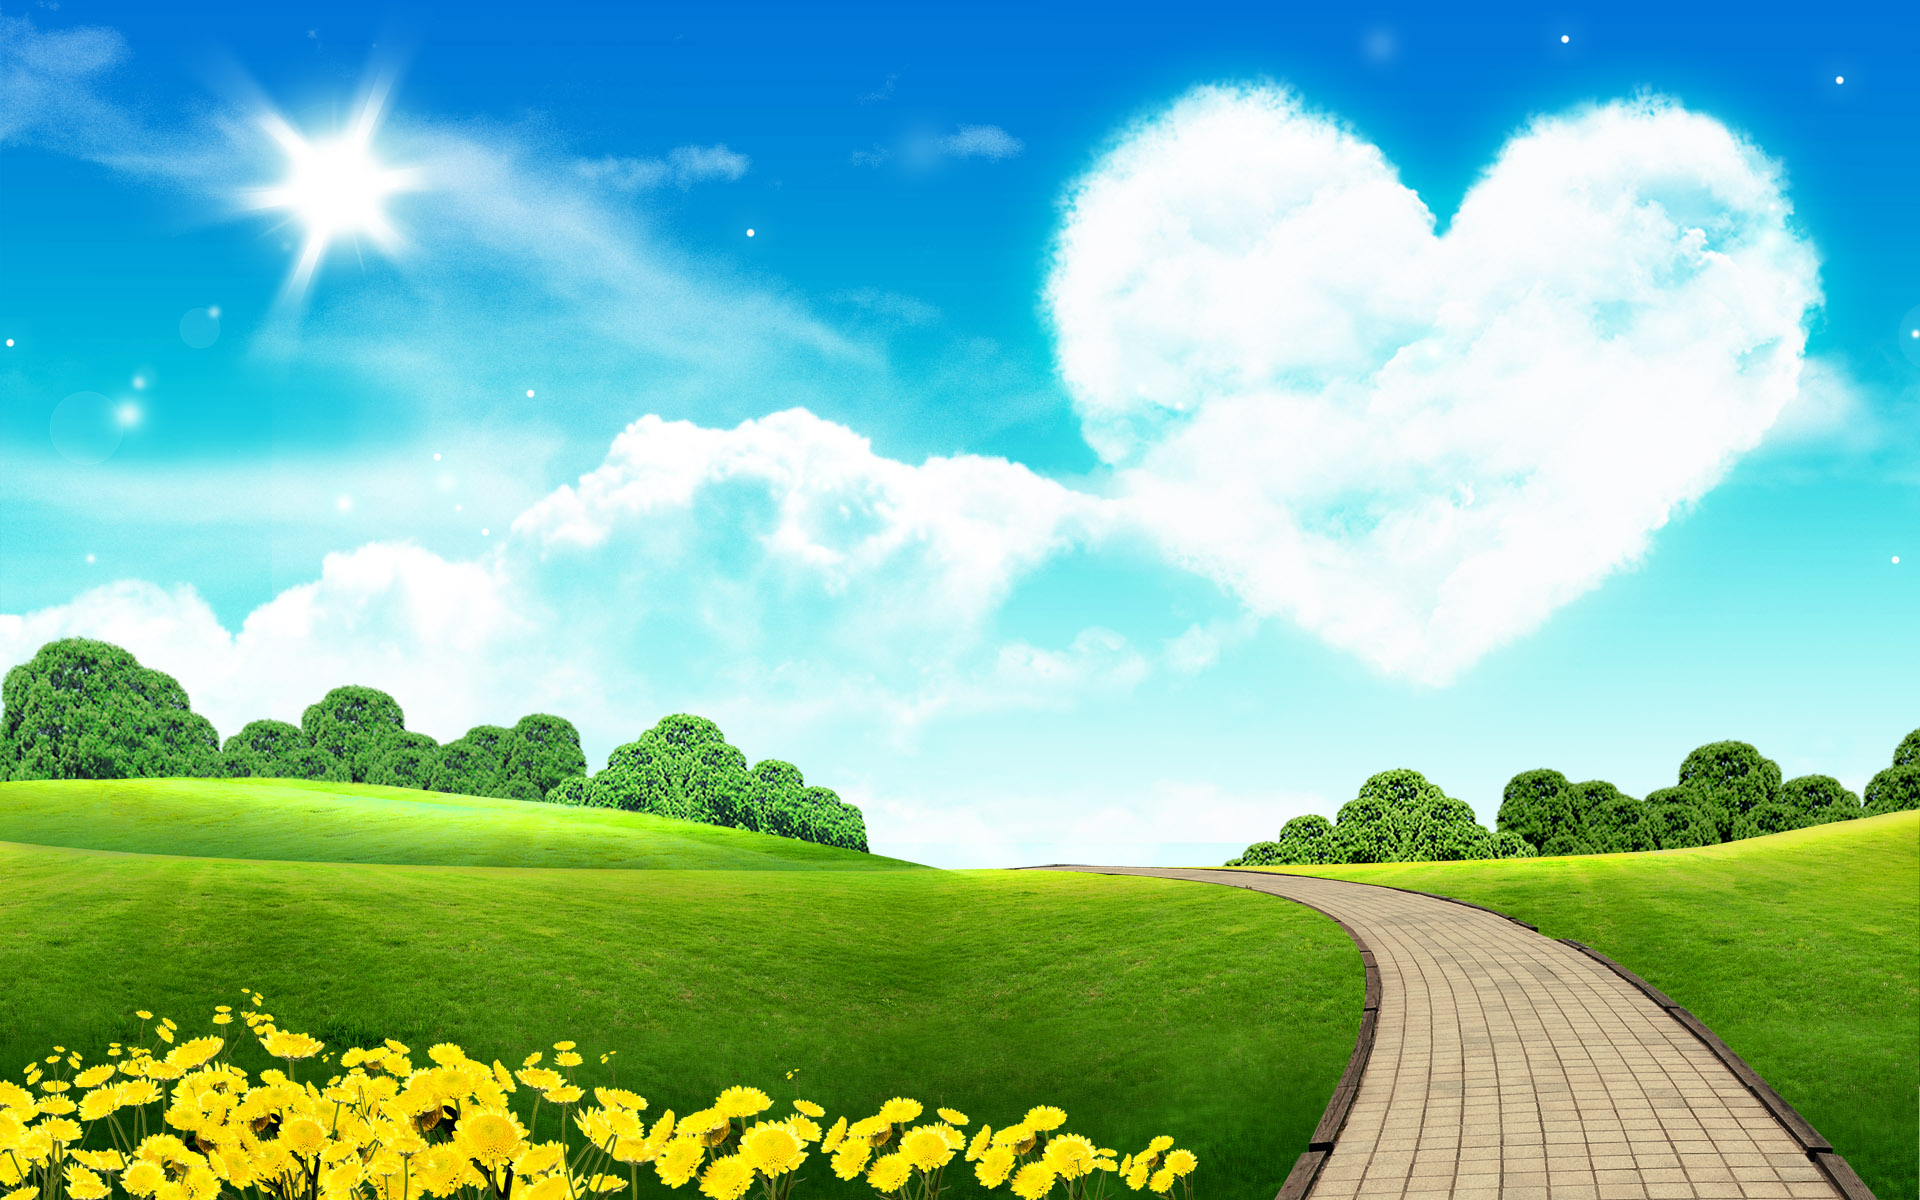 Scenery Wallpaper Includes A Lovely Sky Bound To Look Good On